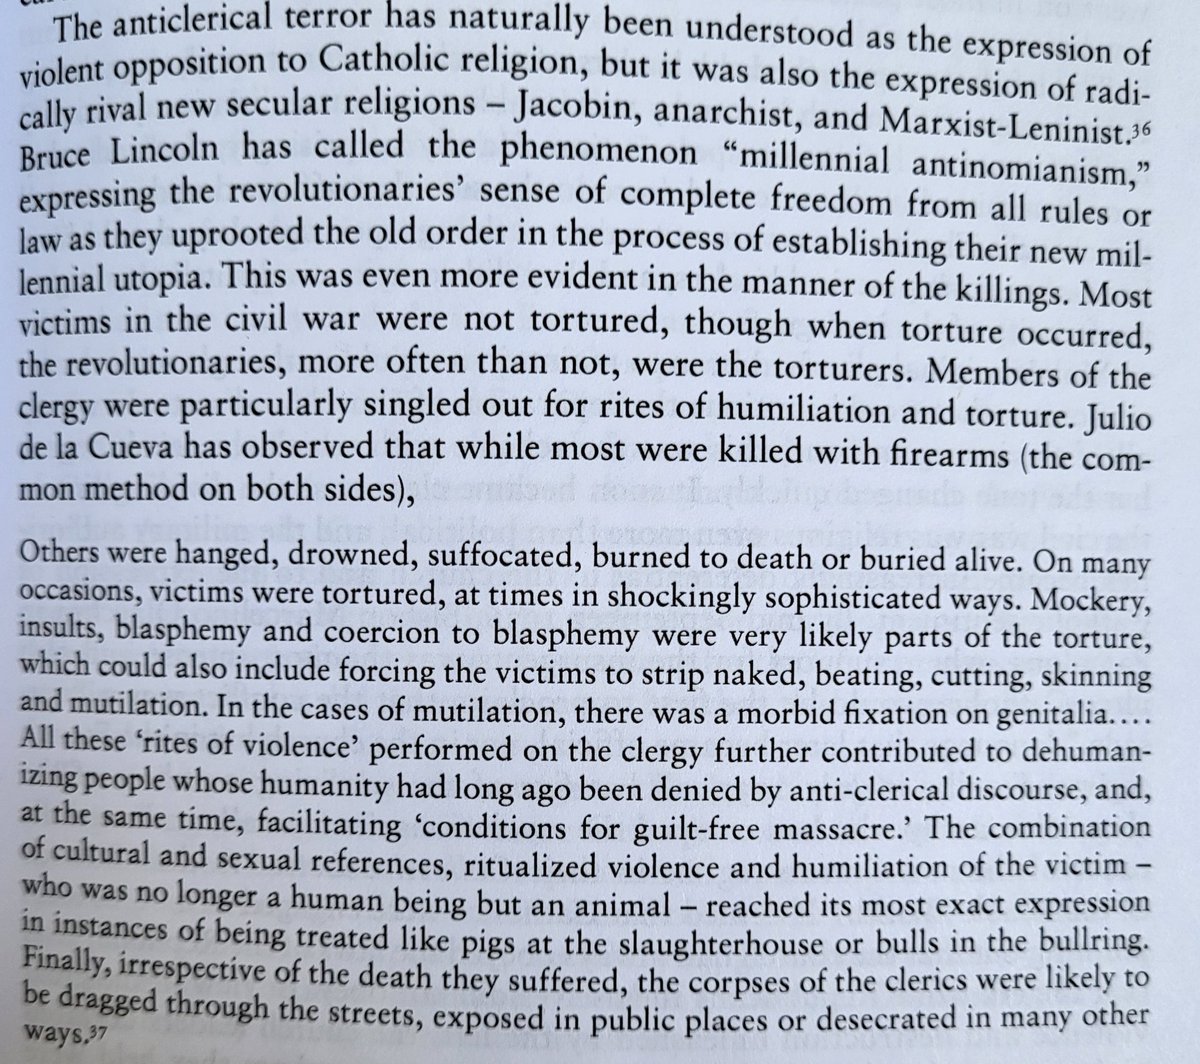 On the anti-clerical repression during the Spanish civil war: